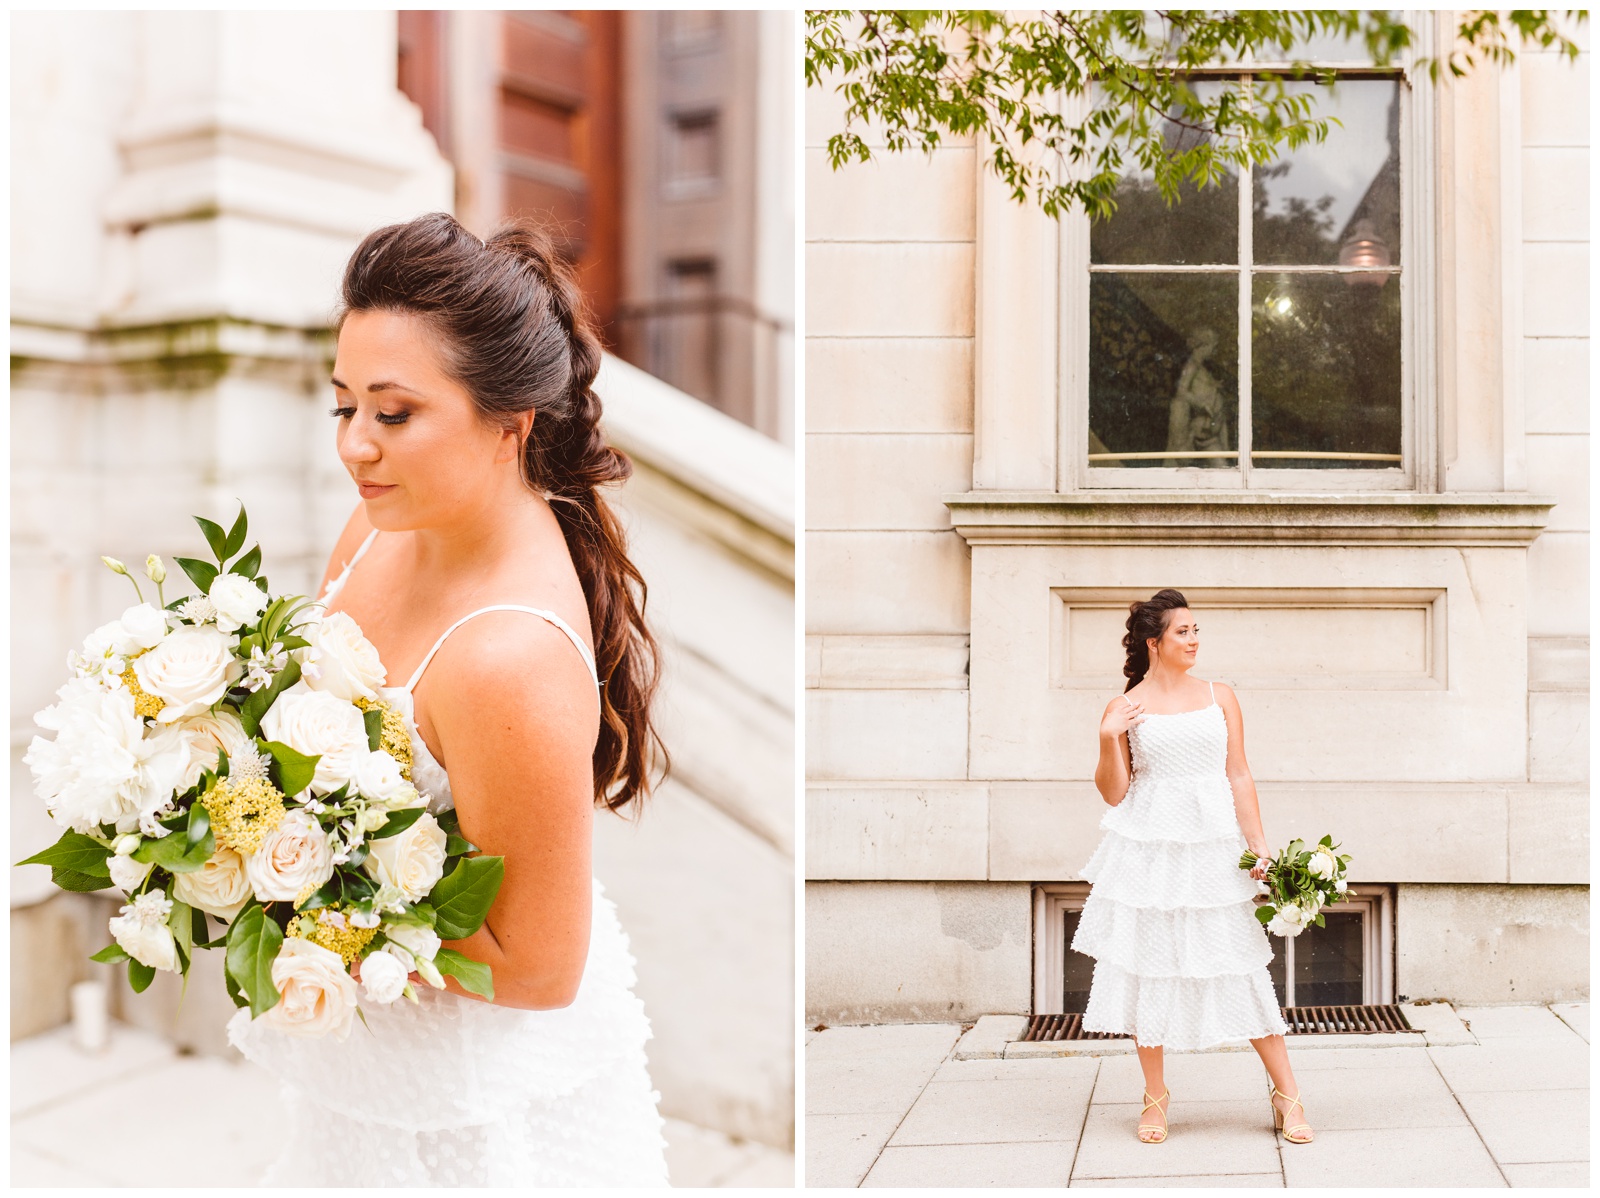 Romantic & Bold Italian Elopement Wedding Inspiration for the Adventurous Couple - Baltimore, Maryland - Brooke Michelle Photography